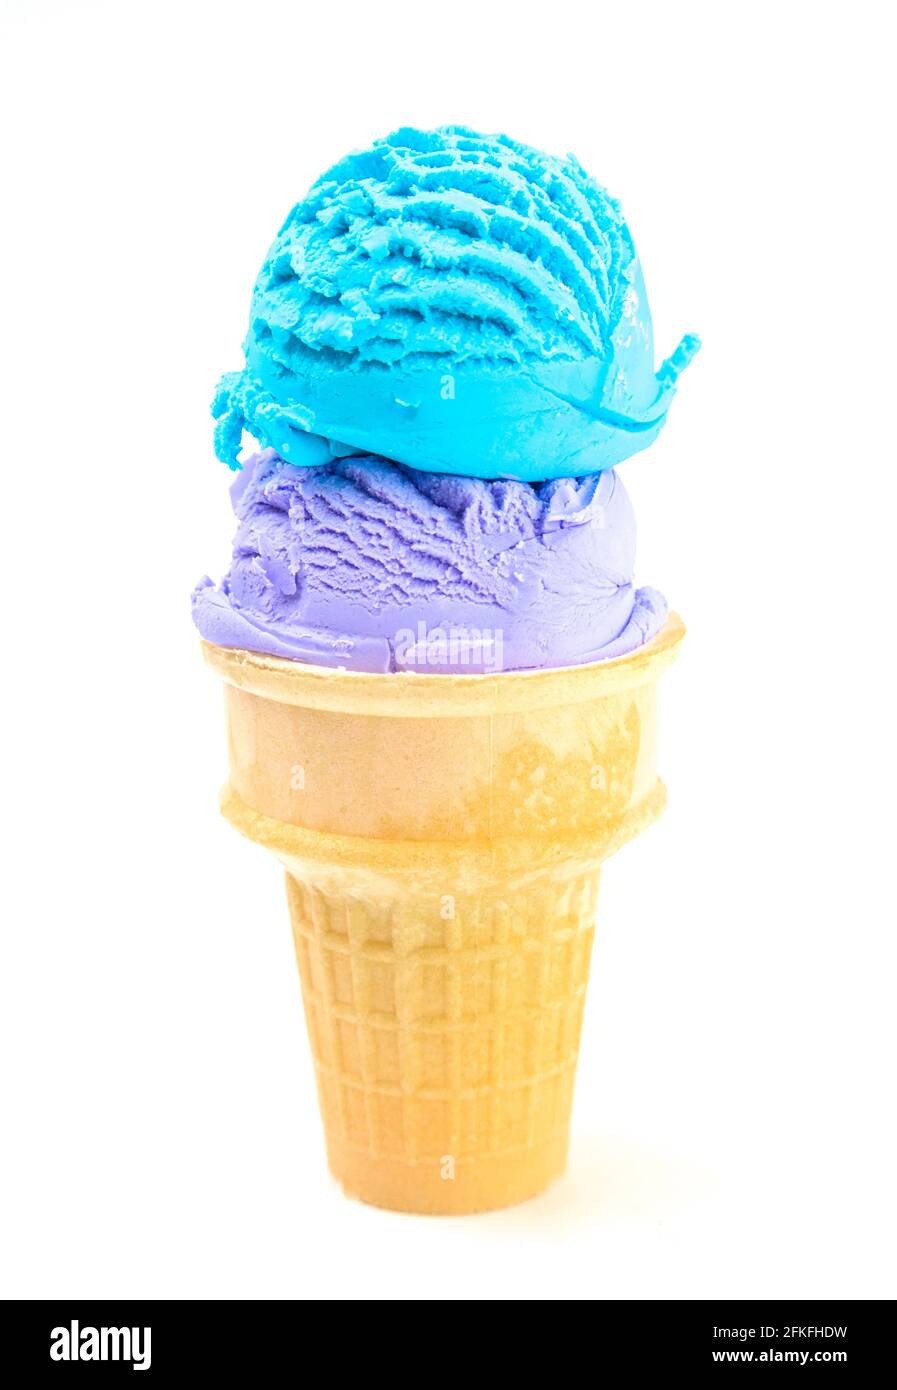 Double Scoop of Purple and Blue Ice Cream Cone on a White